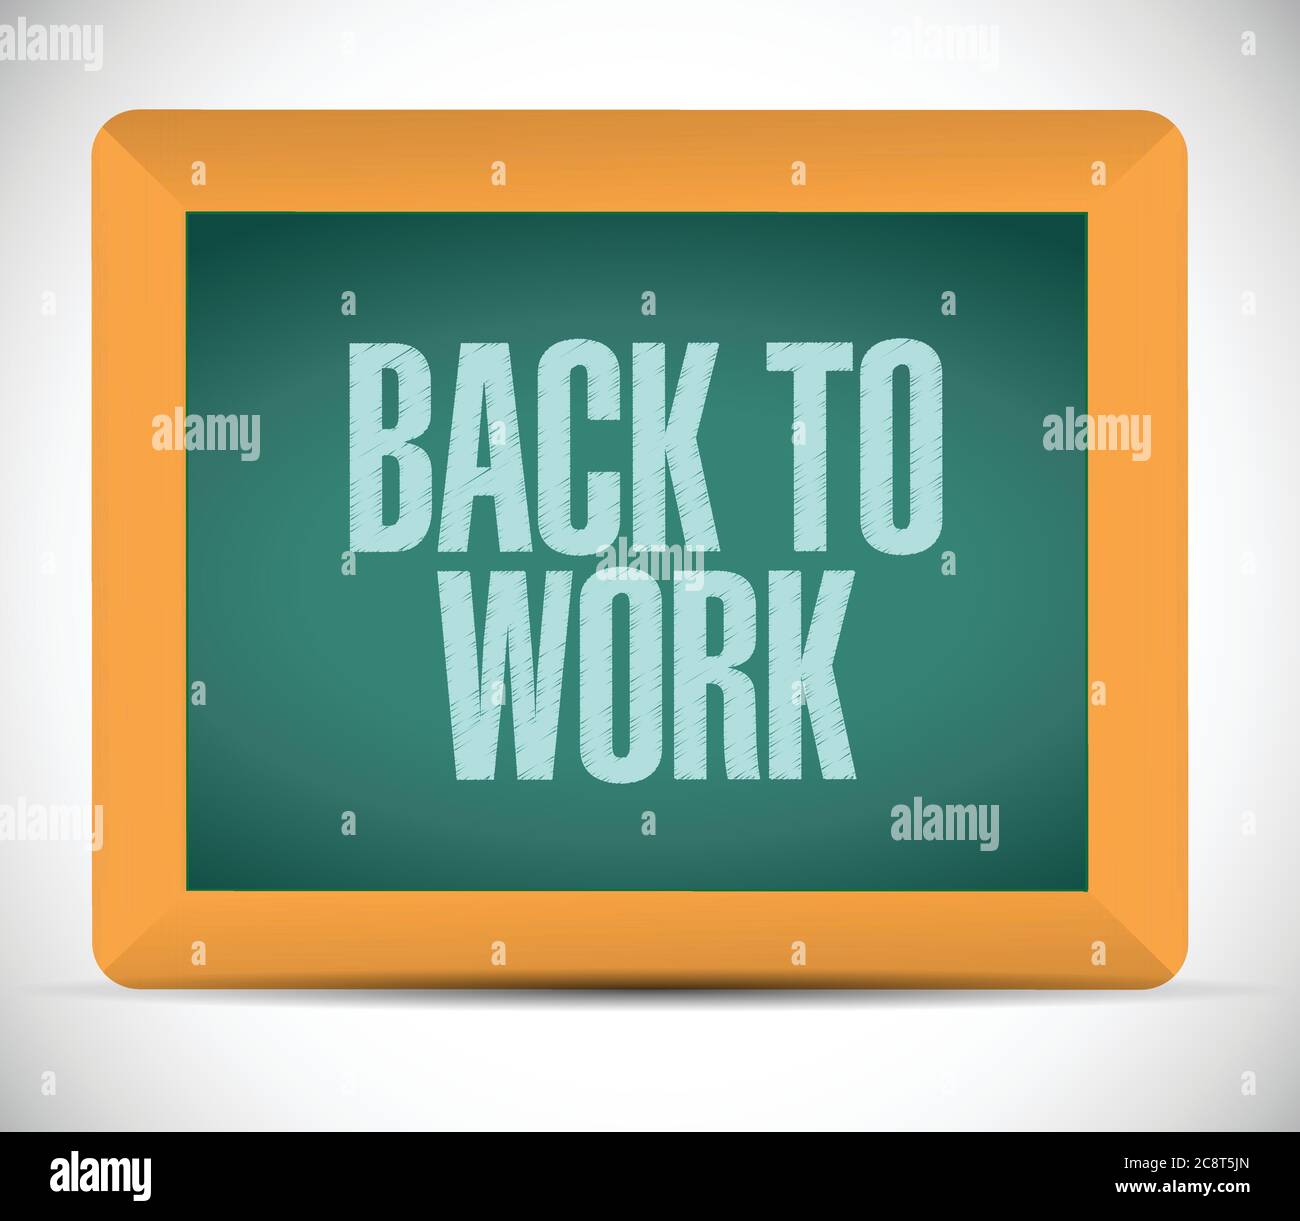 Back to work message on board illustration design over a white background Stock Vector